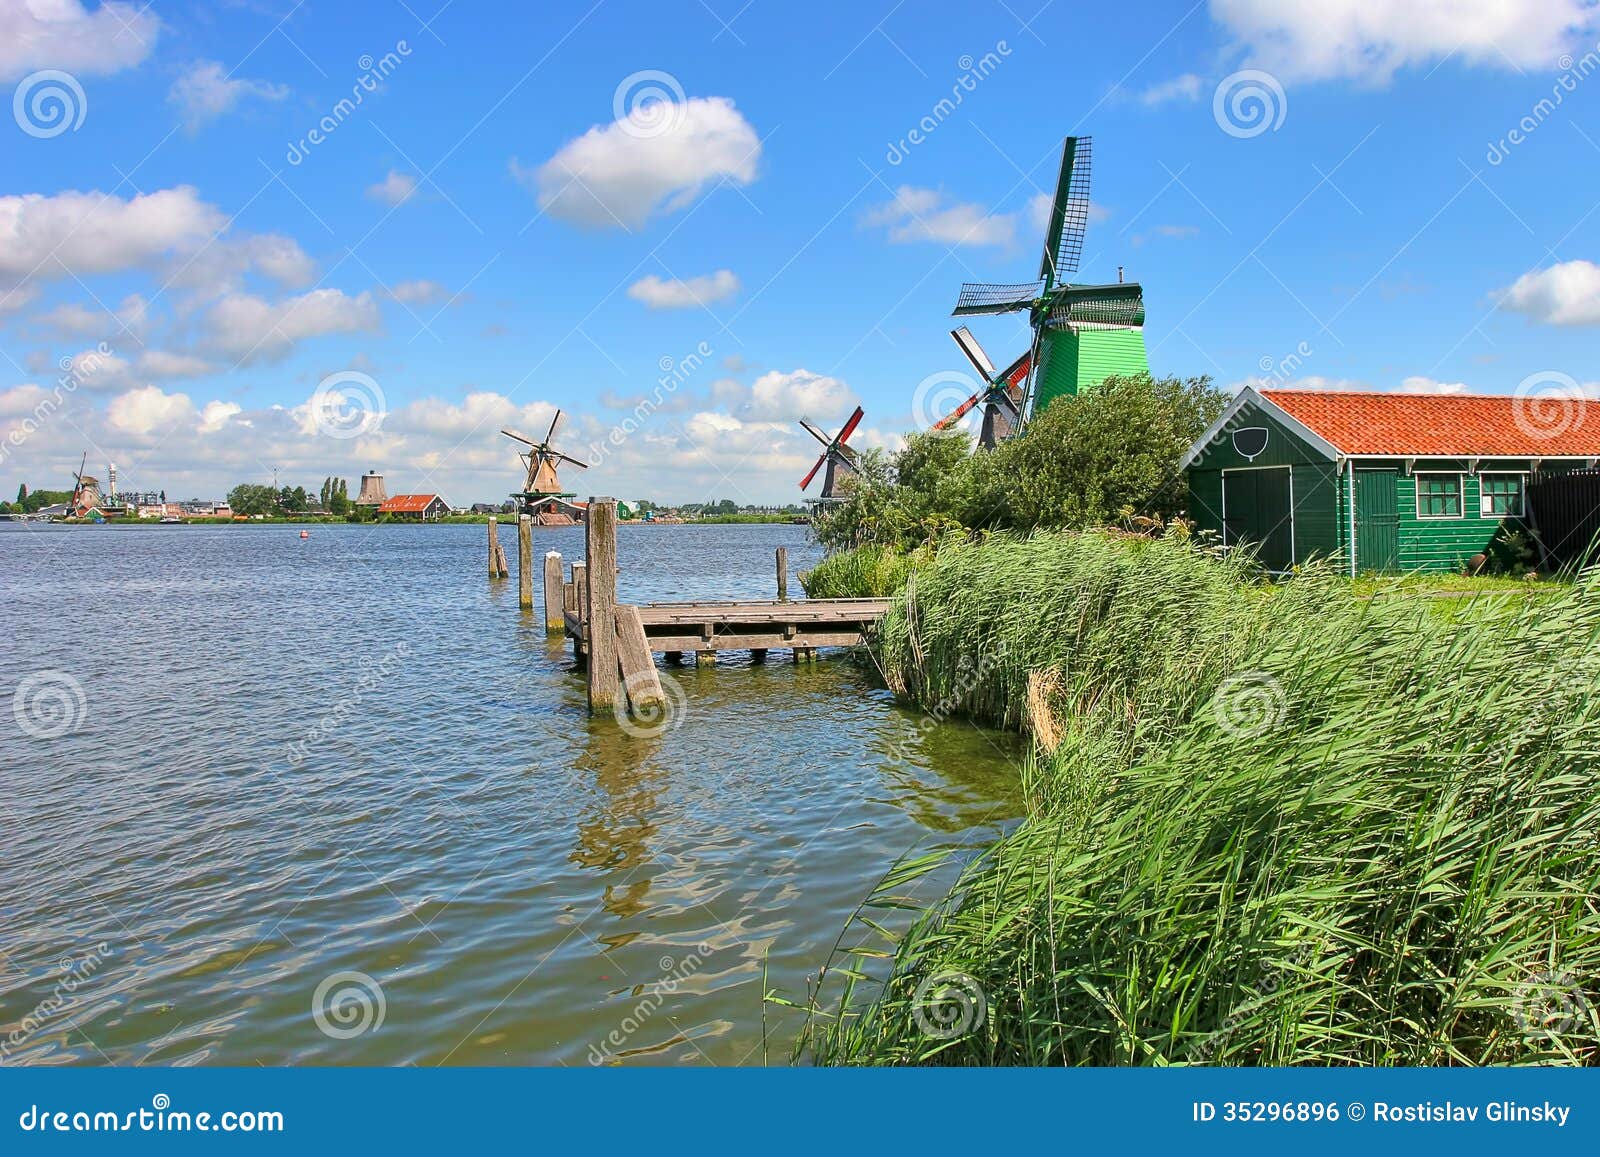 Wooden windmills along river under beautiful blue sky with white 